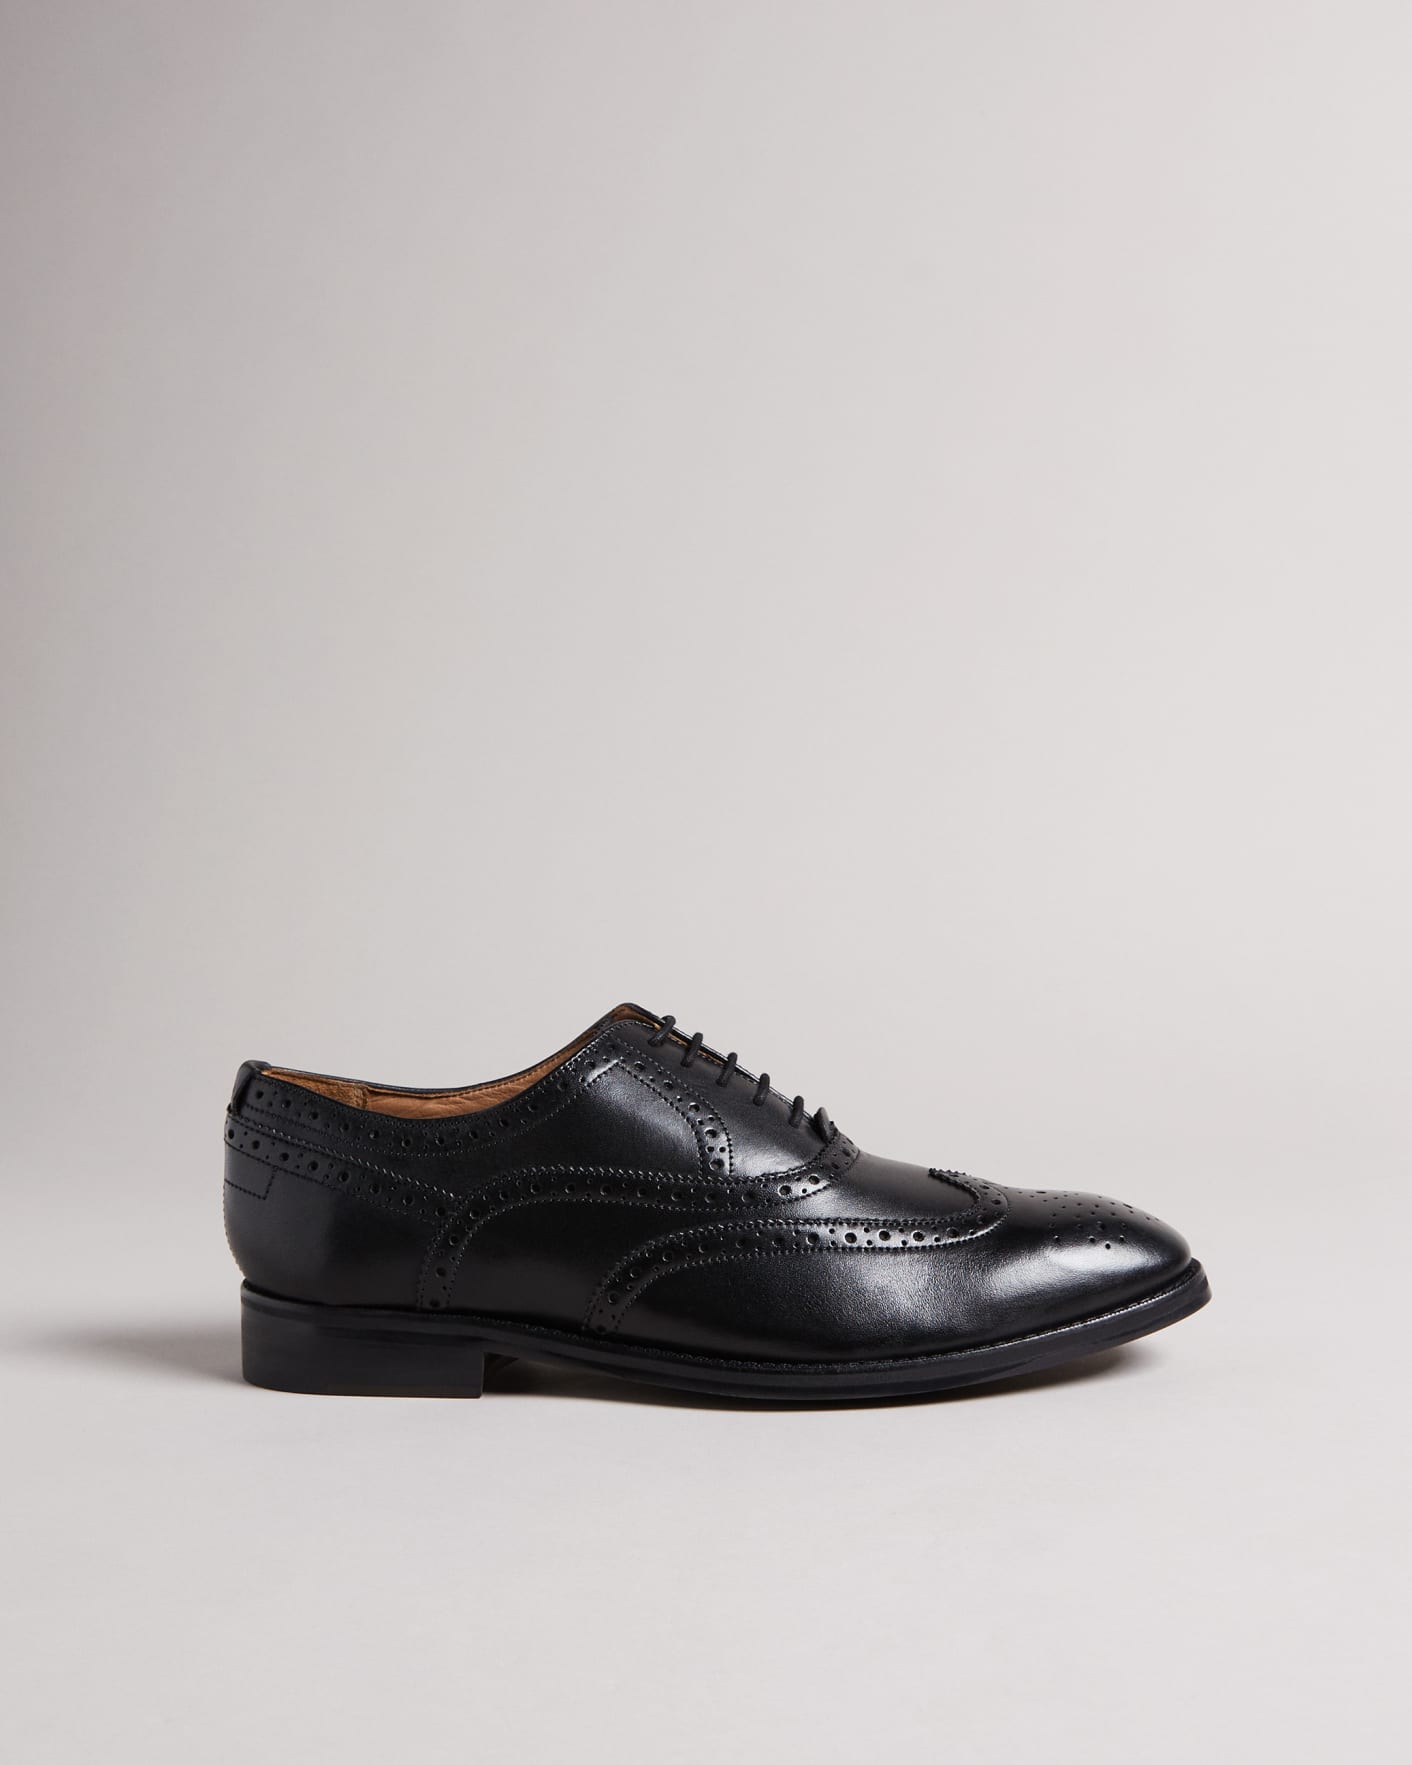 Black Formal Leather Brogue Shoes Ted Baker